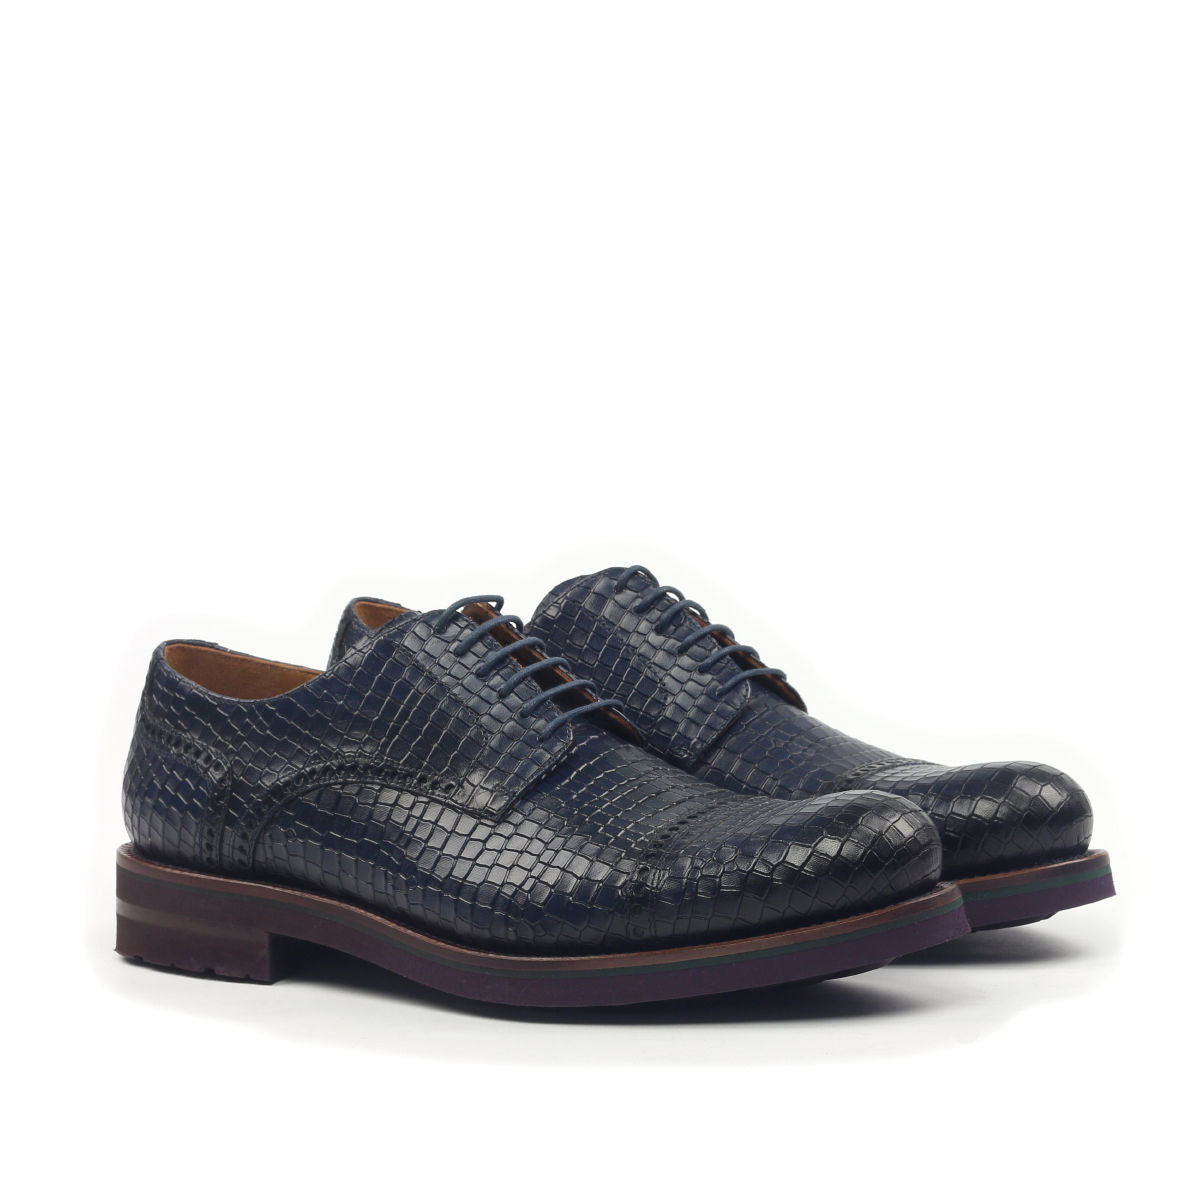 Omine Perforated Cap Toe Derby